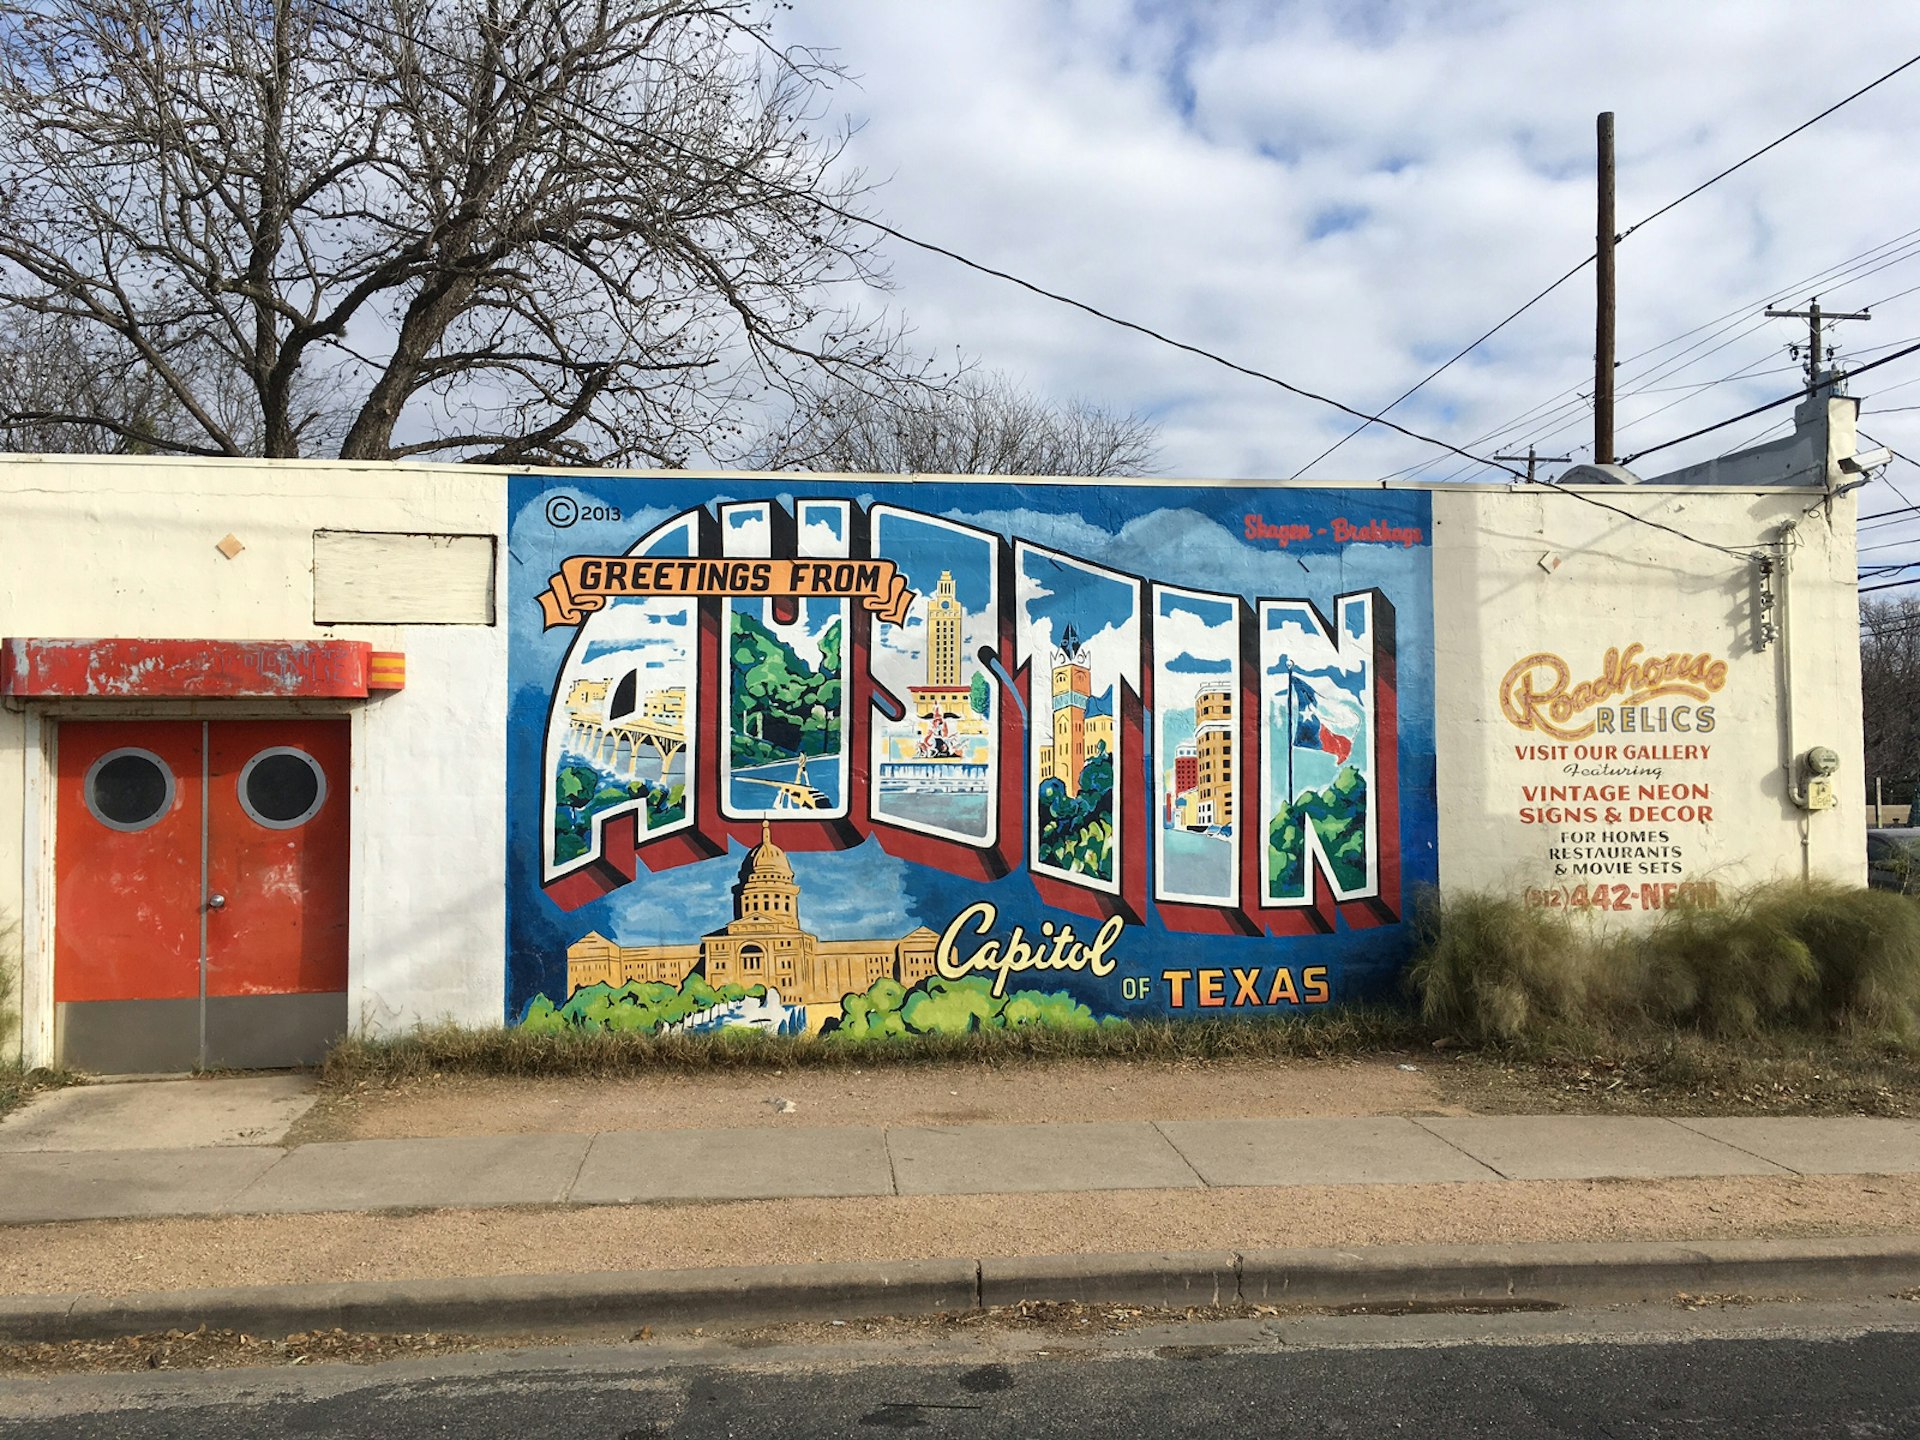 Looks may be deceiving as low-key exteriors house a wealth of great dining and shopping options along South 1st St in Austin @ Amy Balfour / Lonely Planet